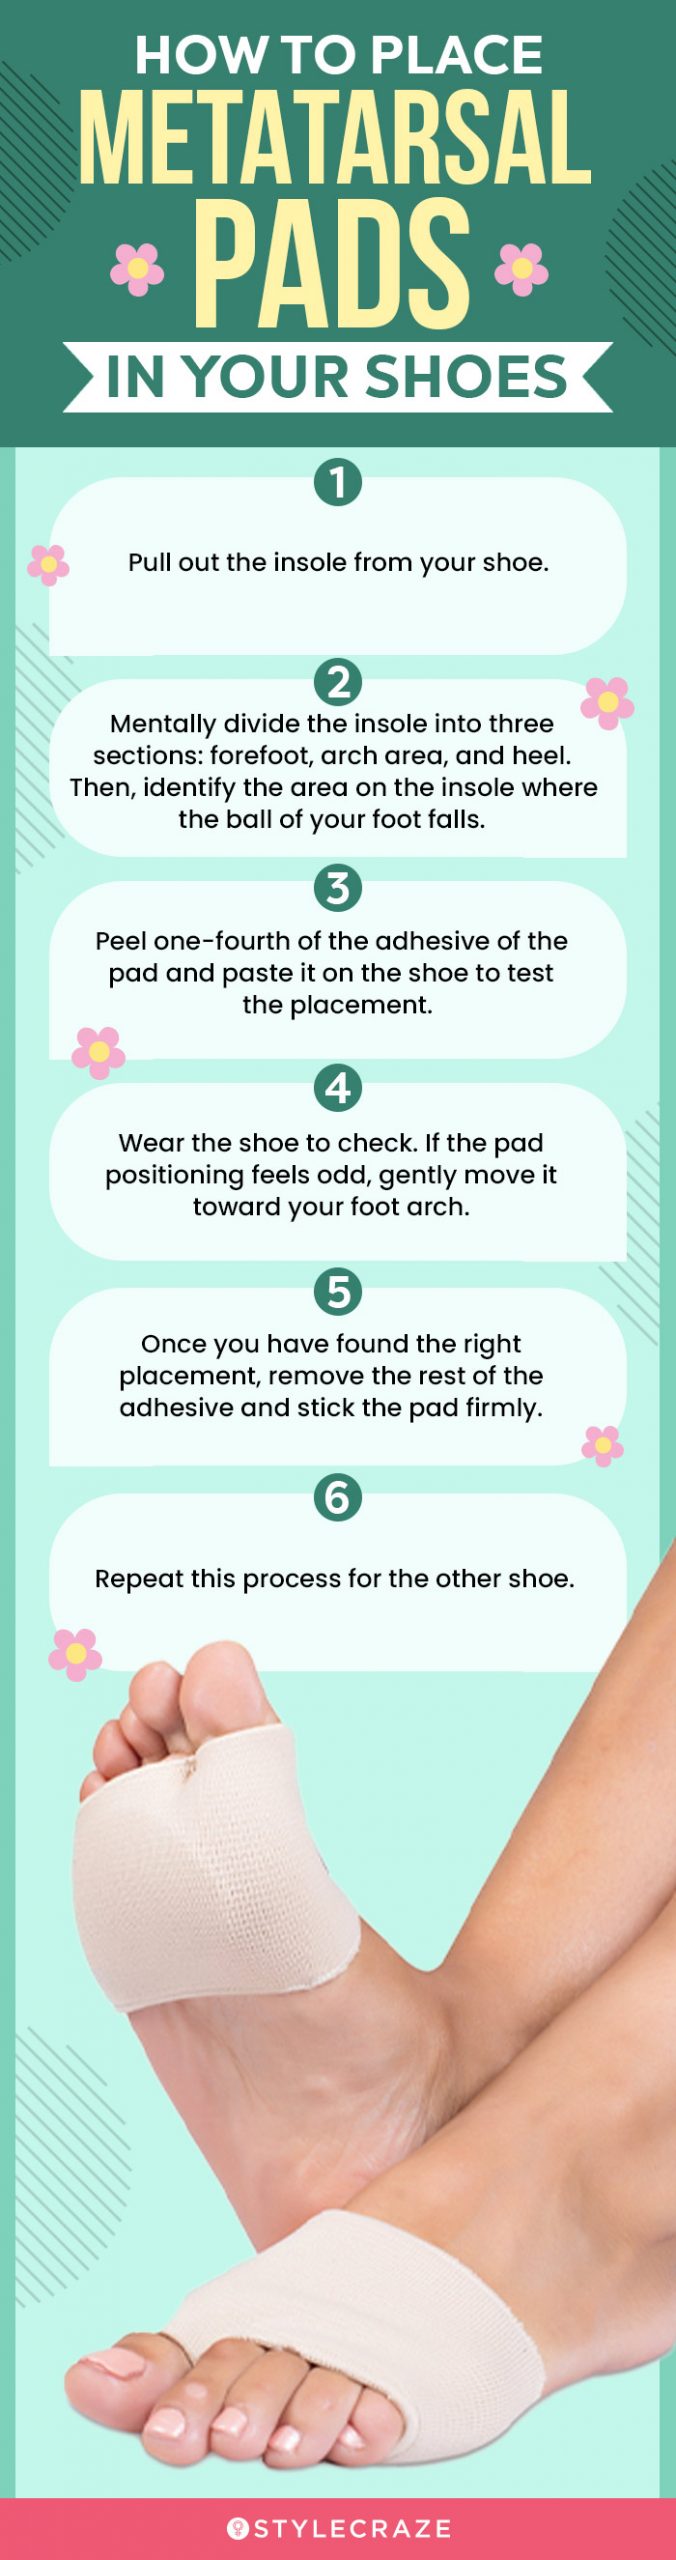 How To Place Metatarsal Pads In Your Shoes (infographic)